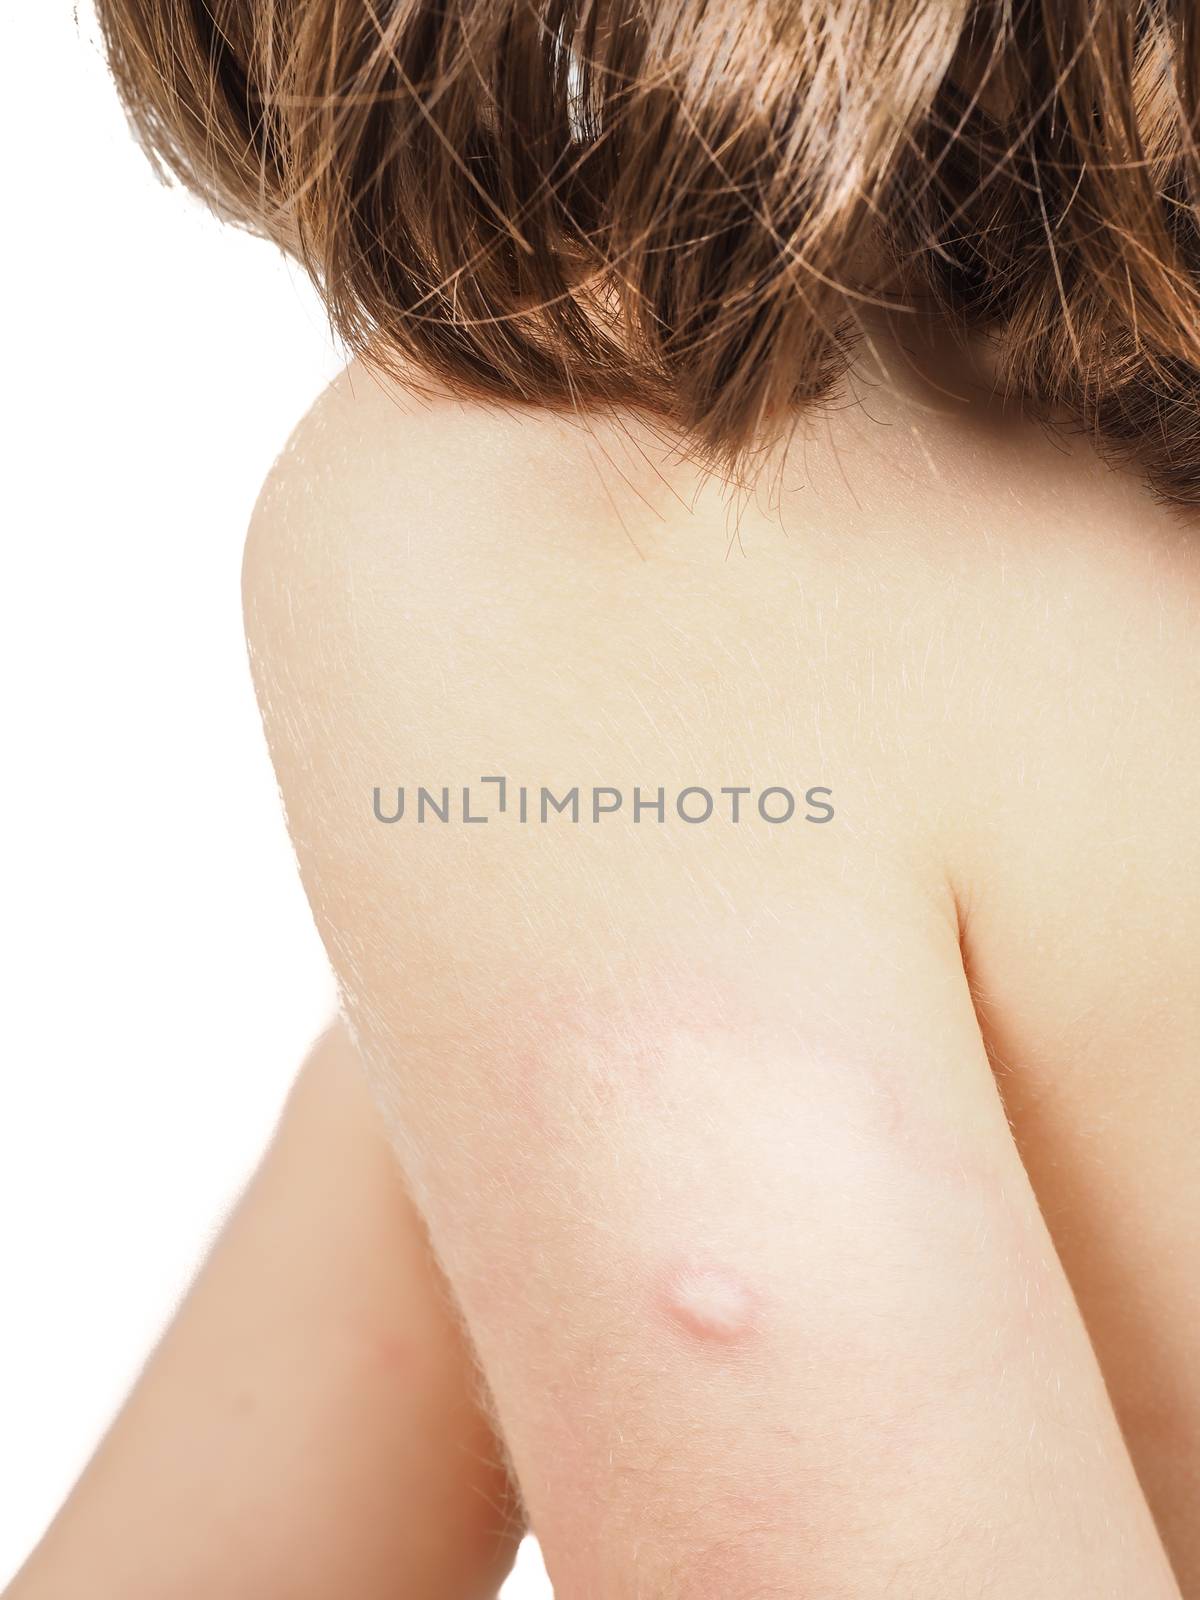 Child with hive, rash, or some skin abnormality by Arvebettum